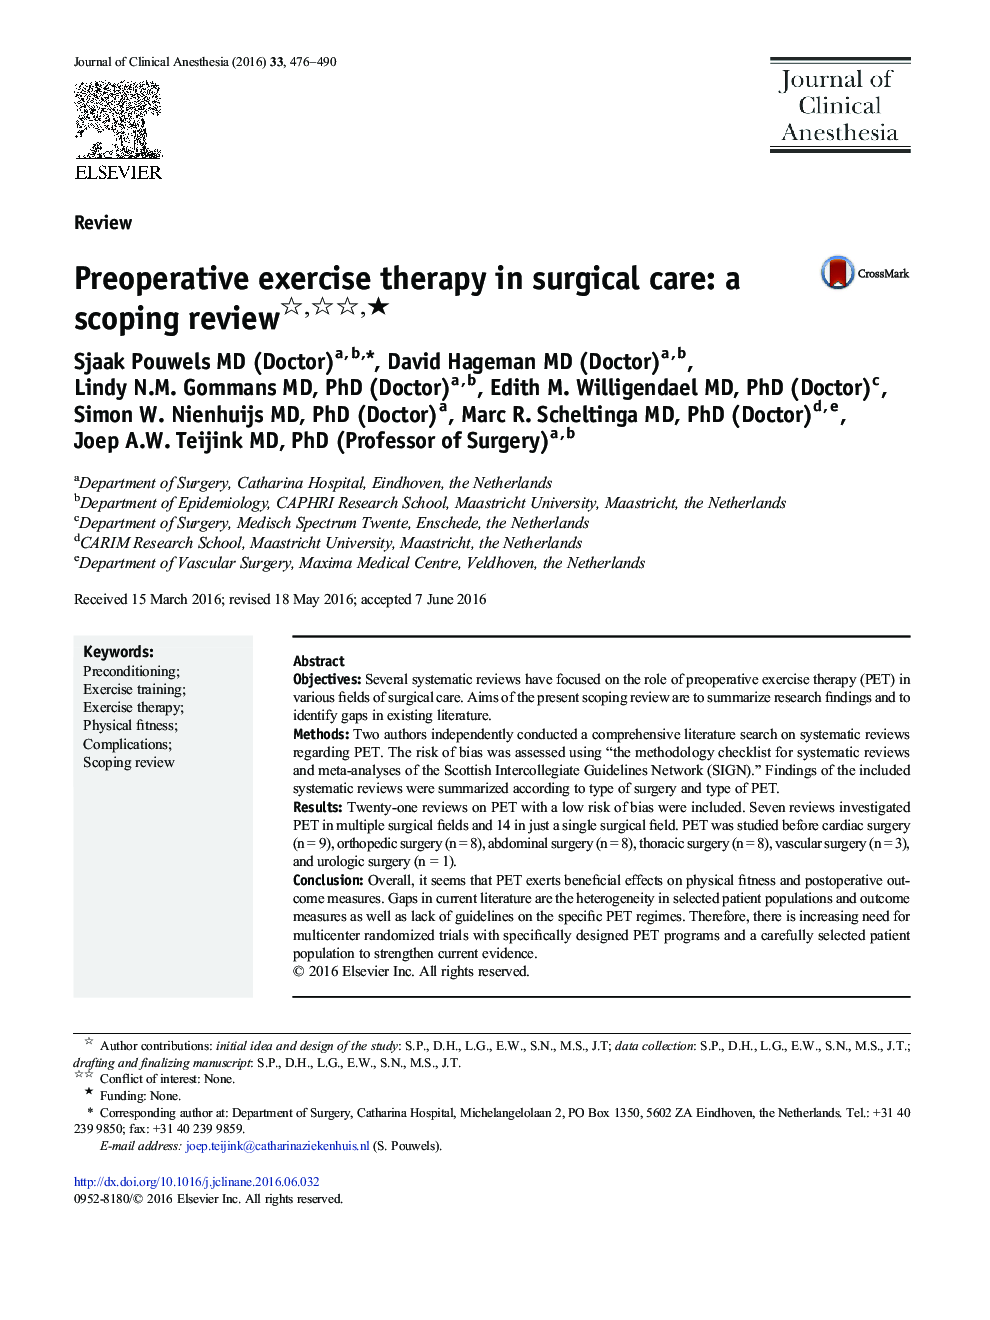 Preoperative exercise therapy in surgical care: a scoping review ★